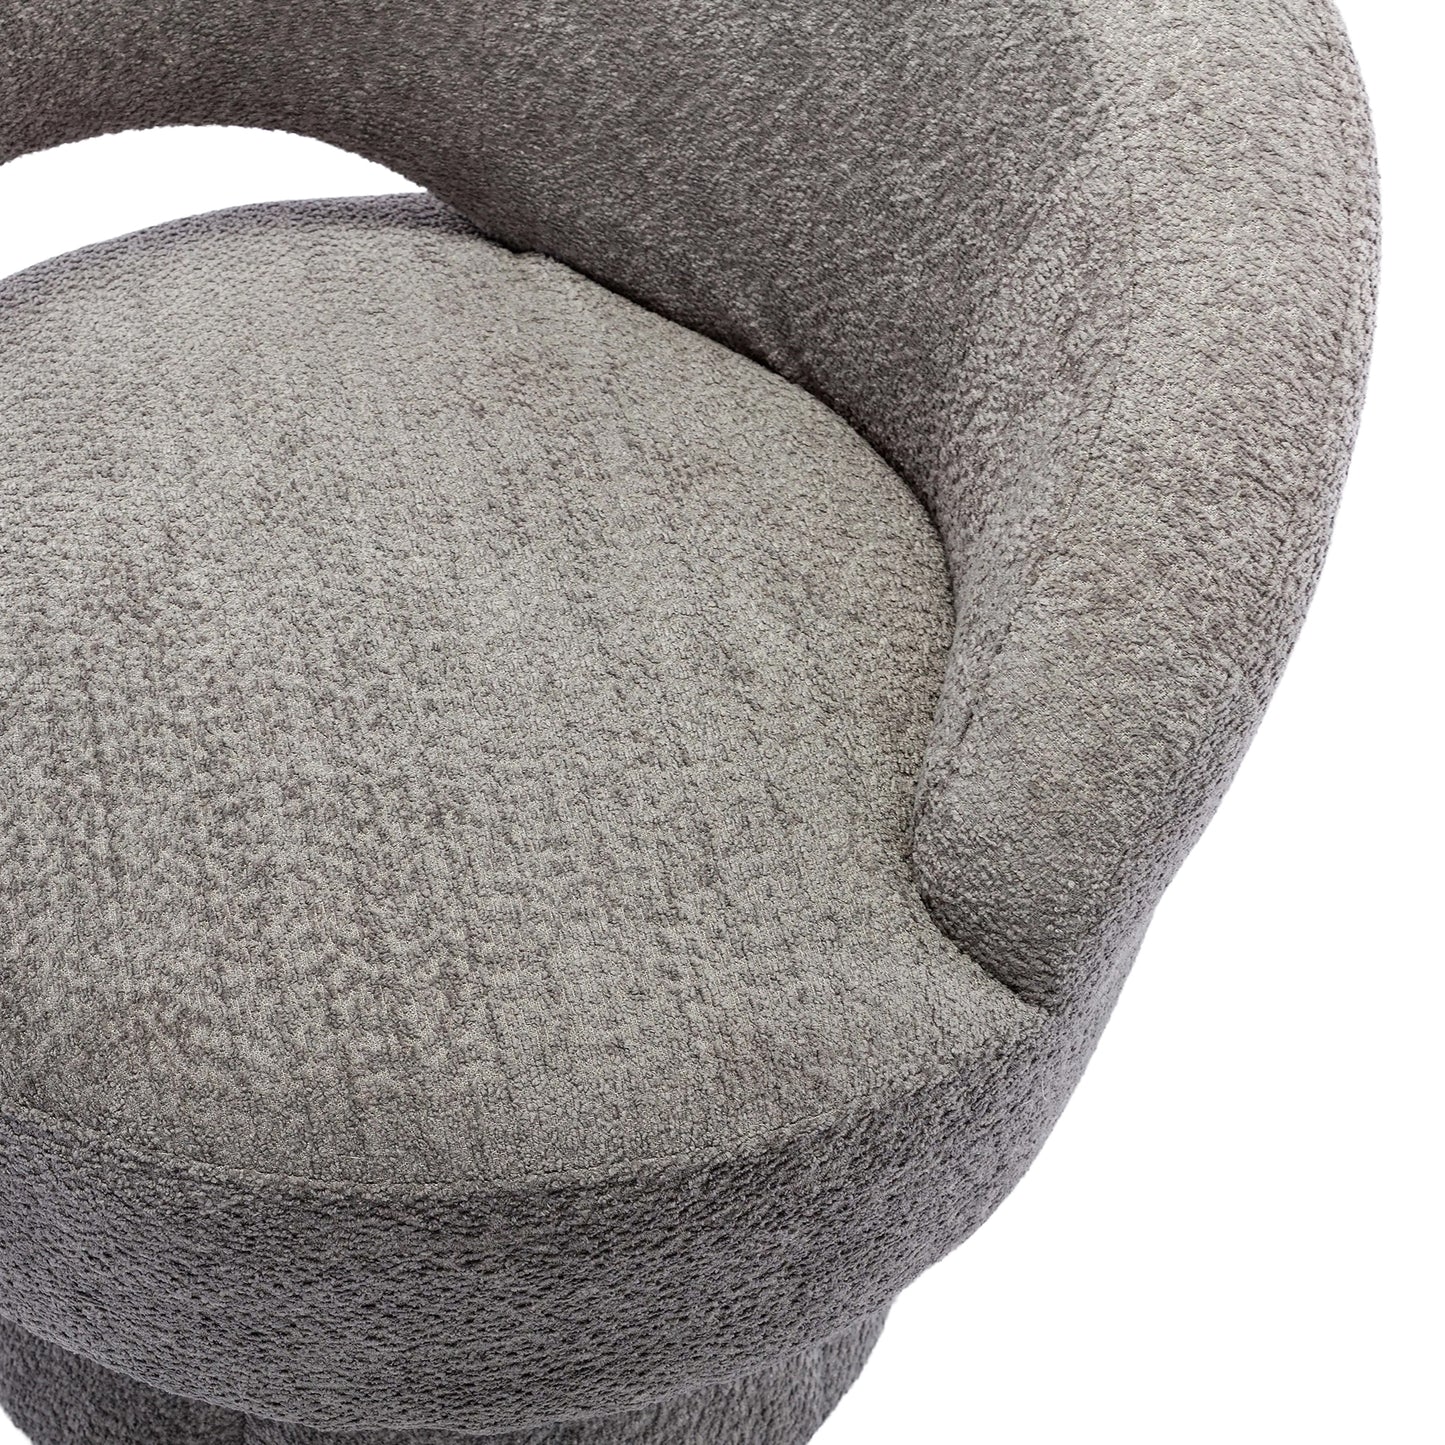 360 Degree Swivel Cuddle Barrel Accent  Chairs, Round Armchairs with Wide Upholstered, Fluffy  Fabric Chair for Living Room, Bedroom, Office, Waiting Rooms - Enova Luxe Home Store